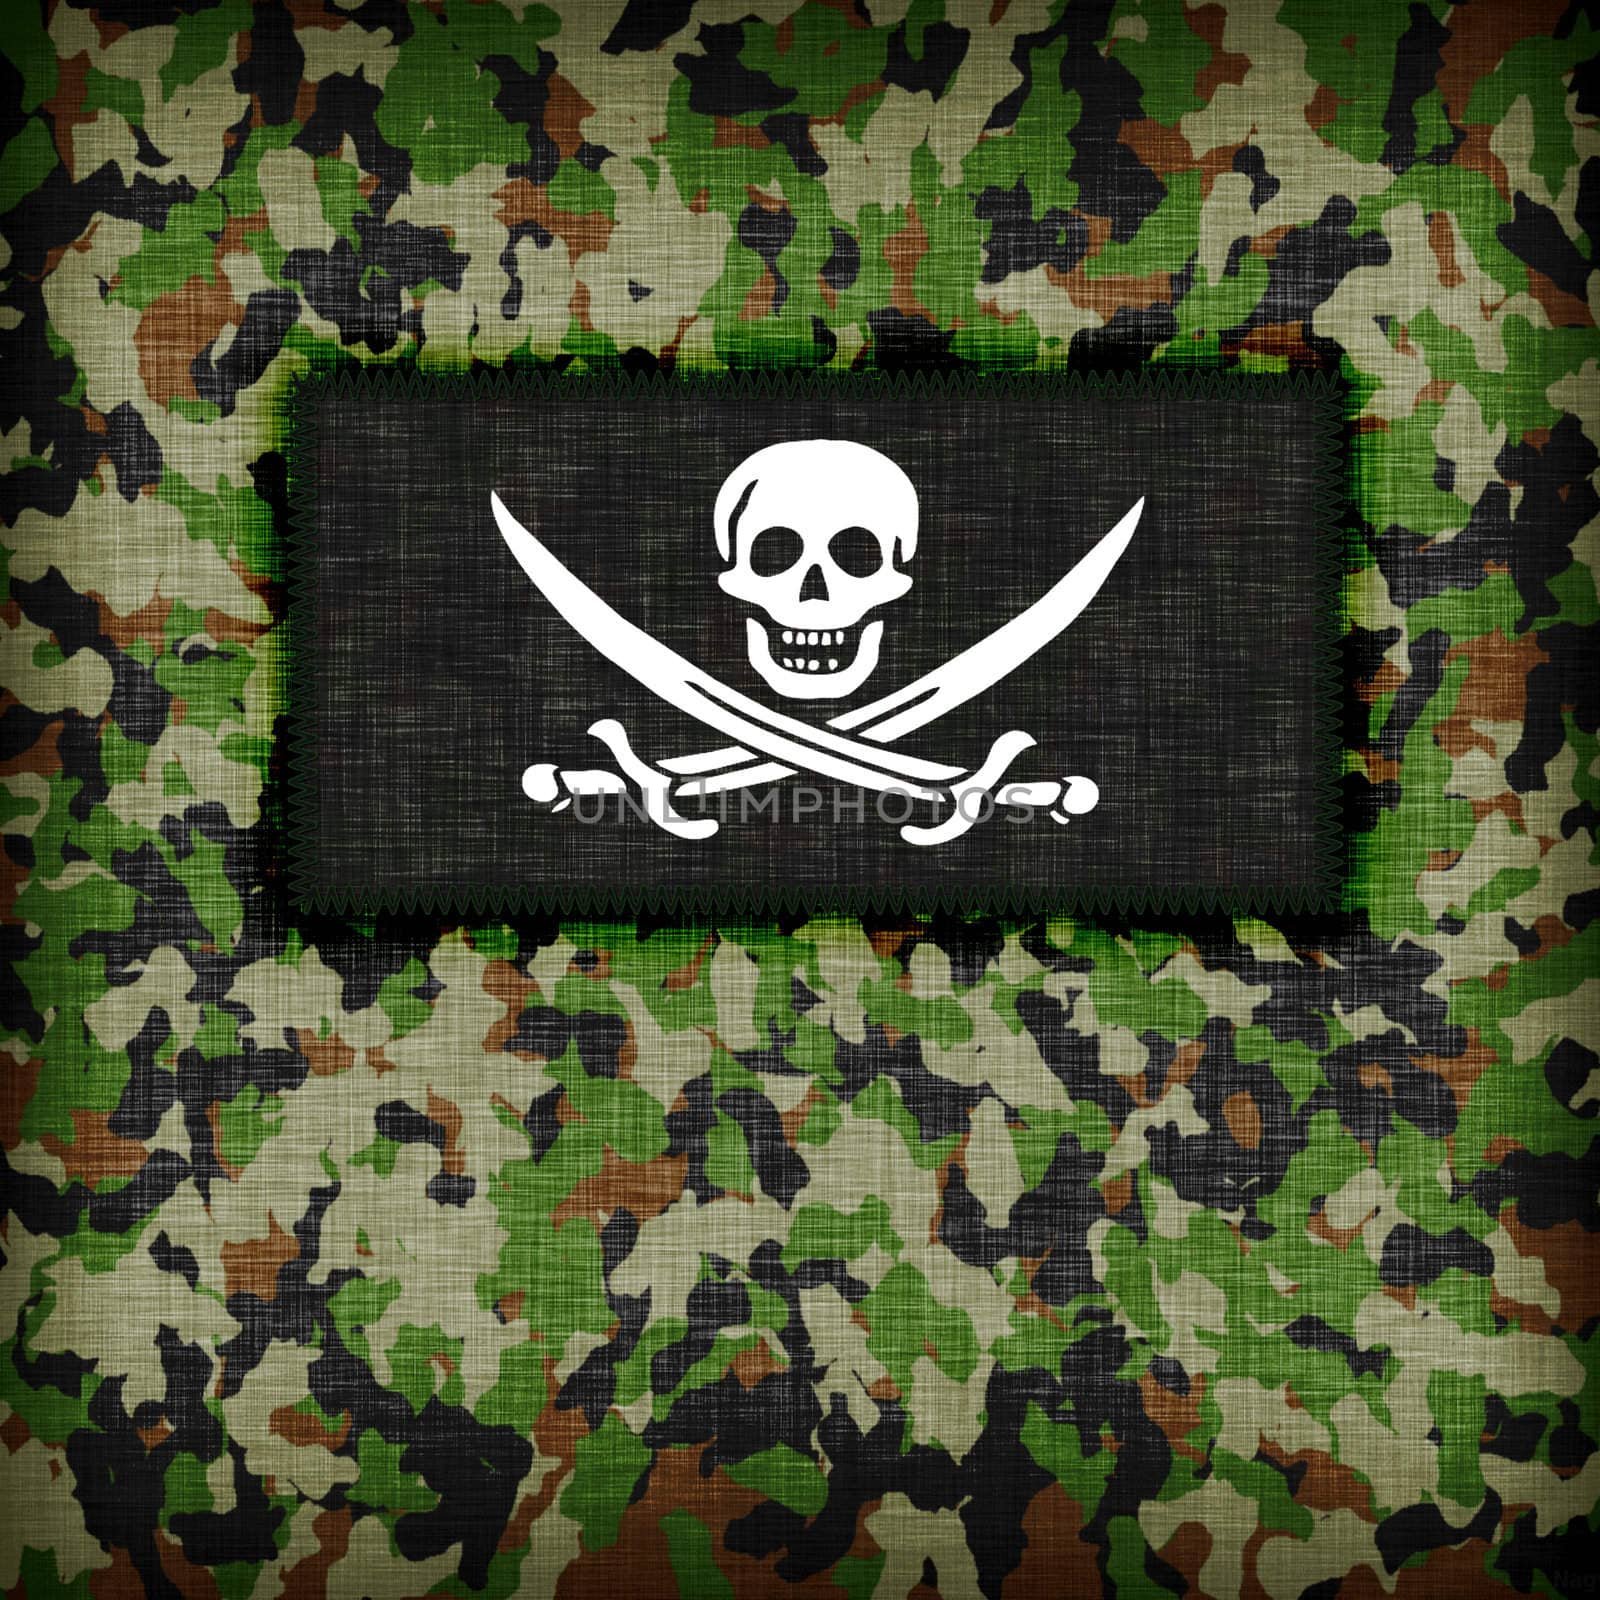 Amy camouflage uniform with flag on it, Pirate